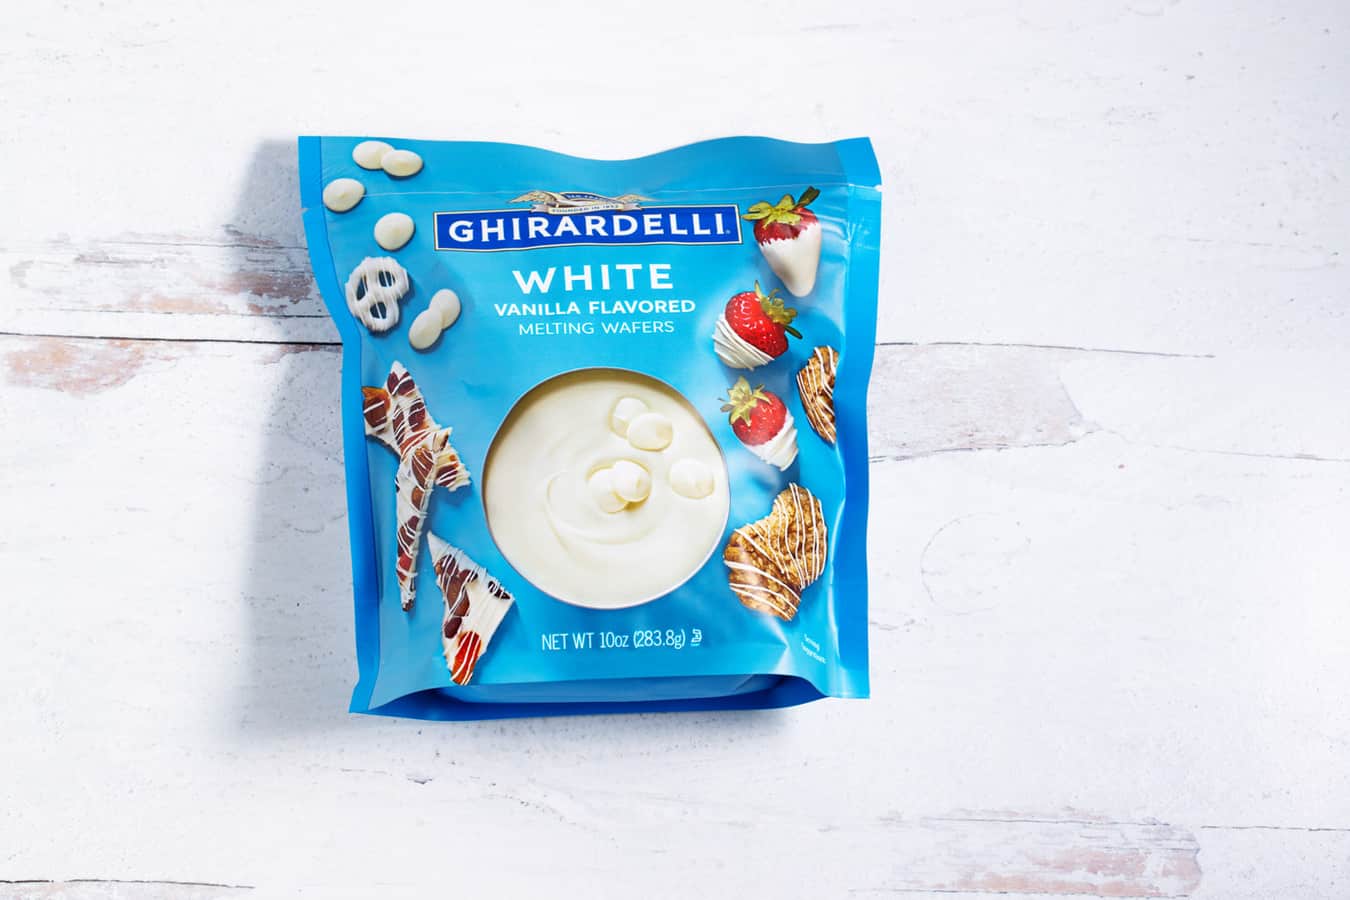 bag of Ghirardelli white melting wafers